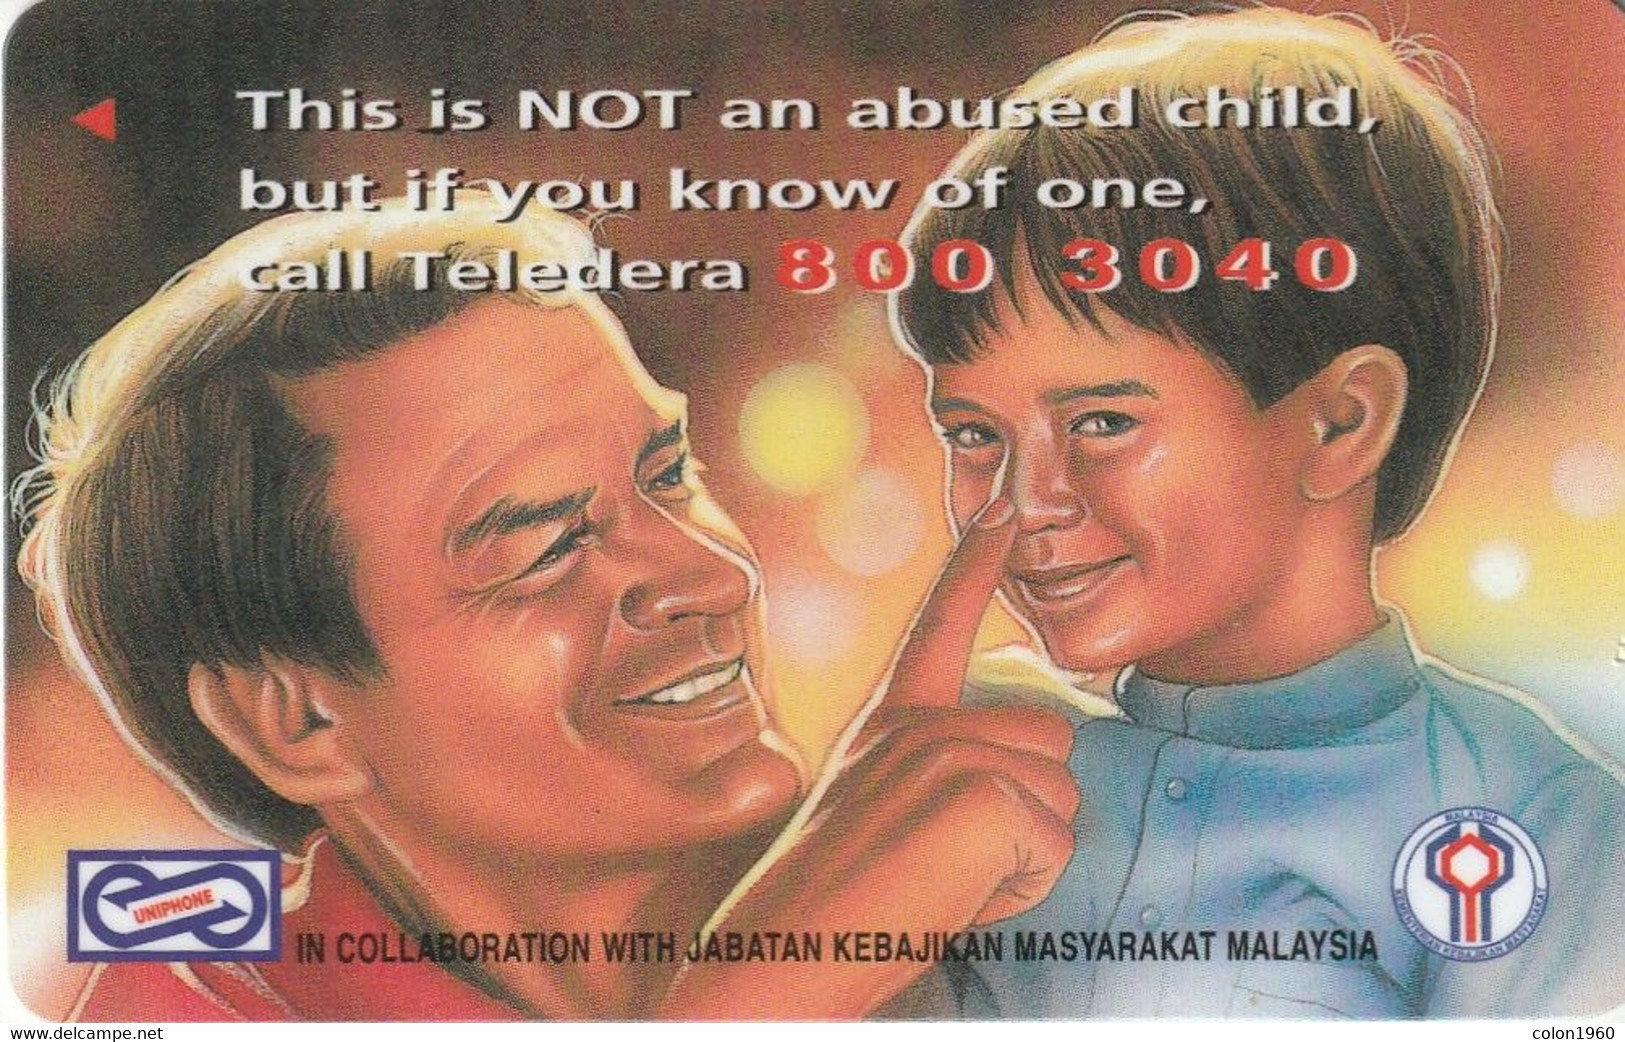 MALASIA. 20USBA. This Is Not An Abused Child. 1995. (050) - Malaysia